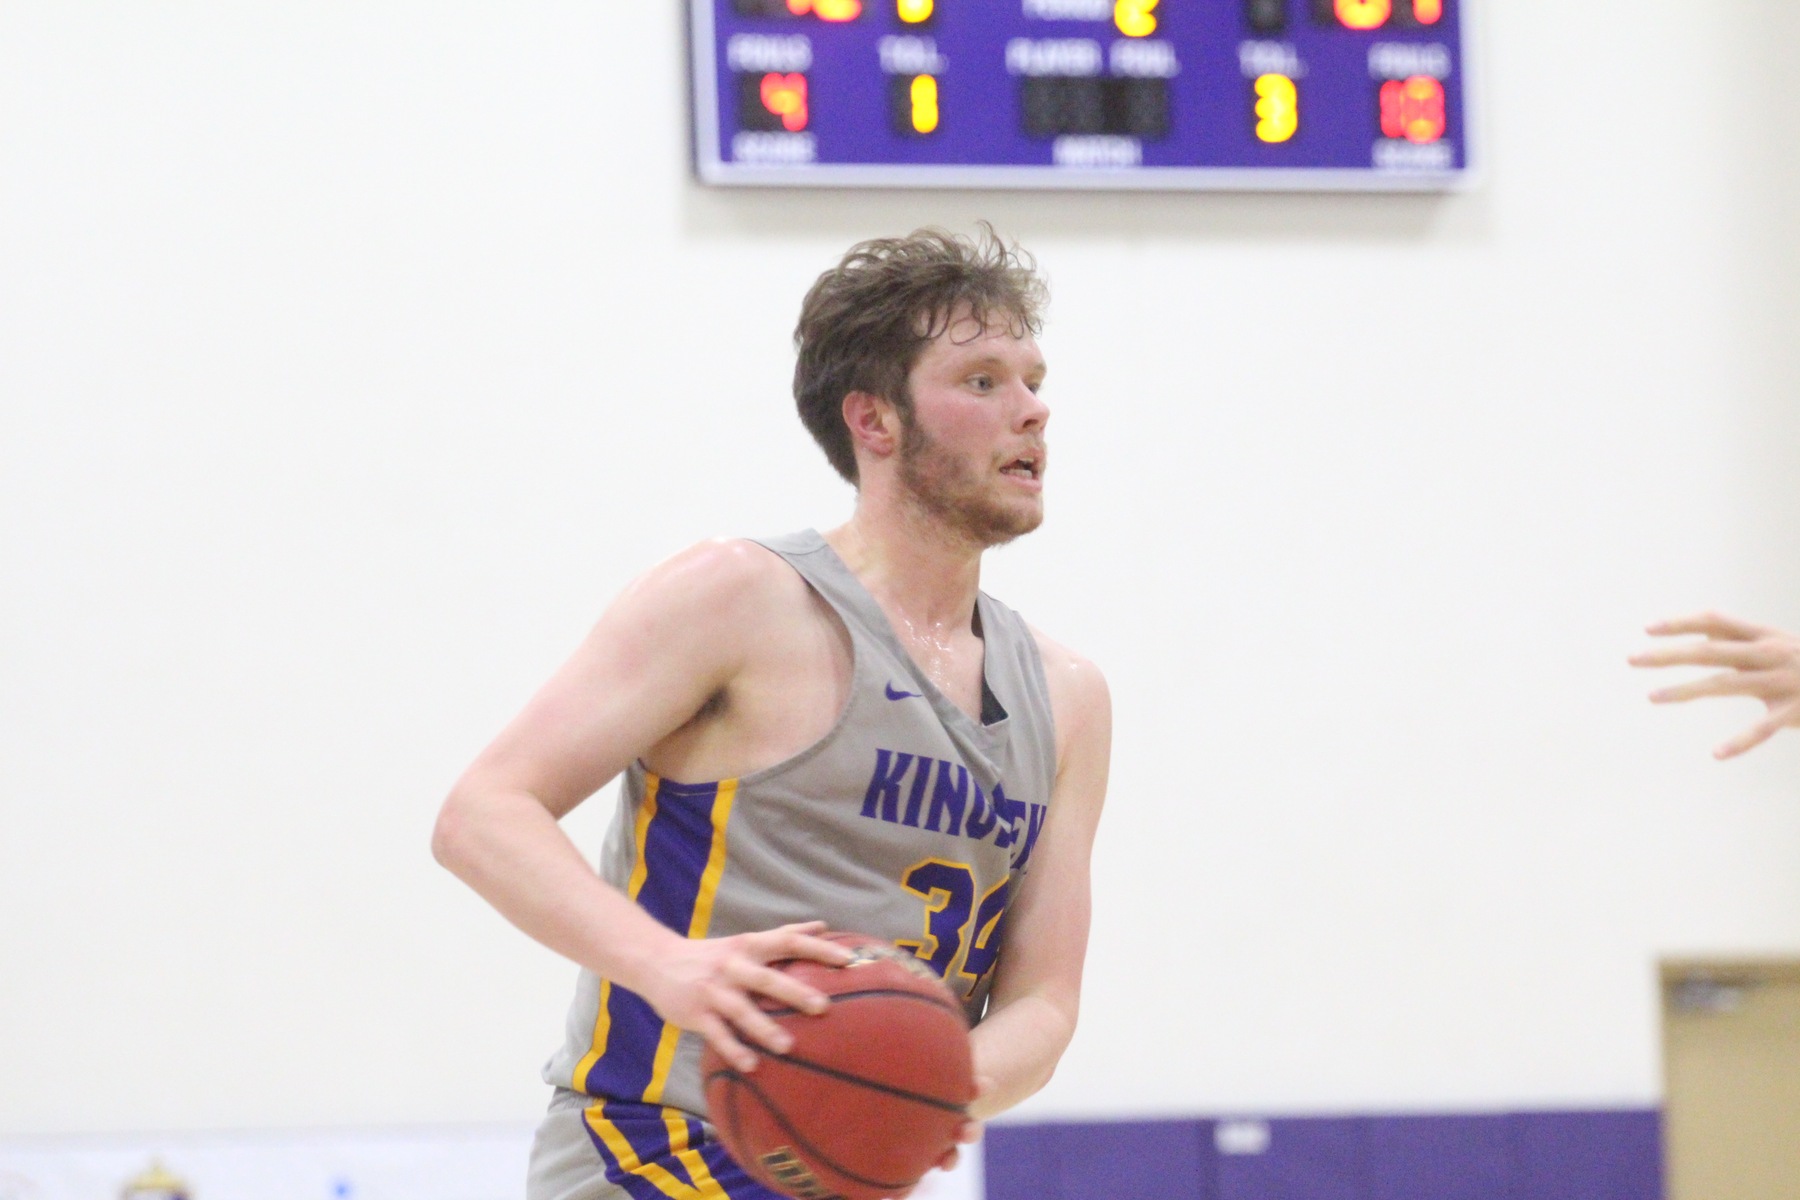 Tyler Brabant scored a career-high 15 points in the loss to Occidental.